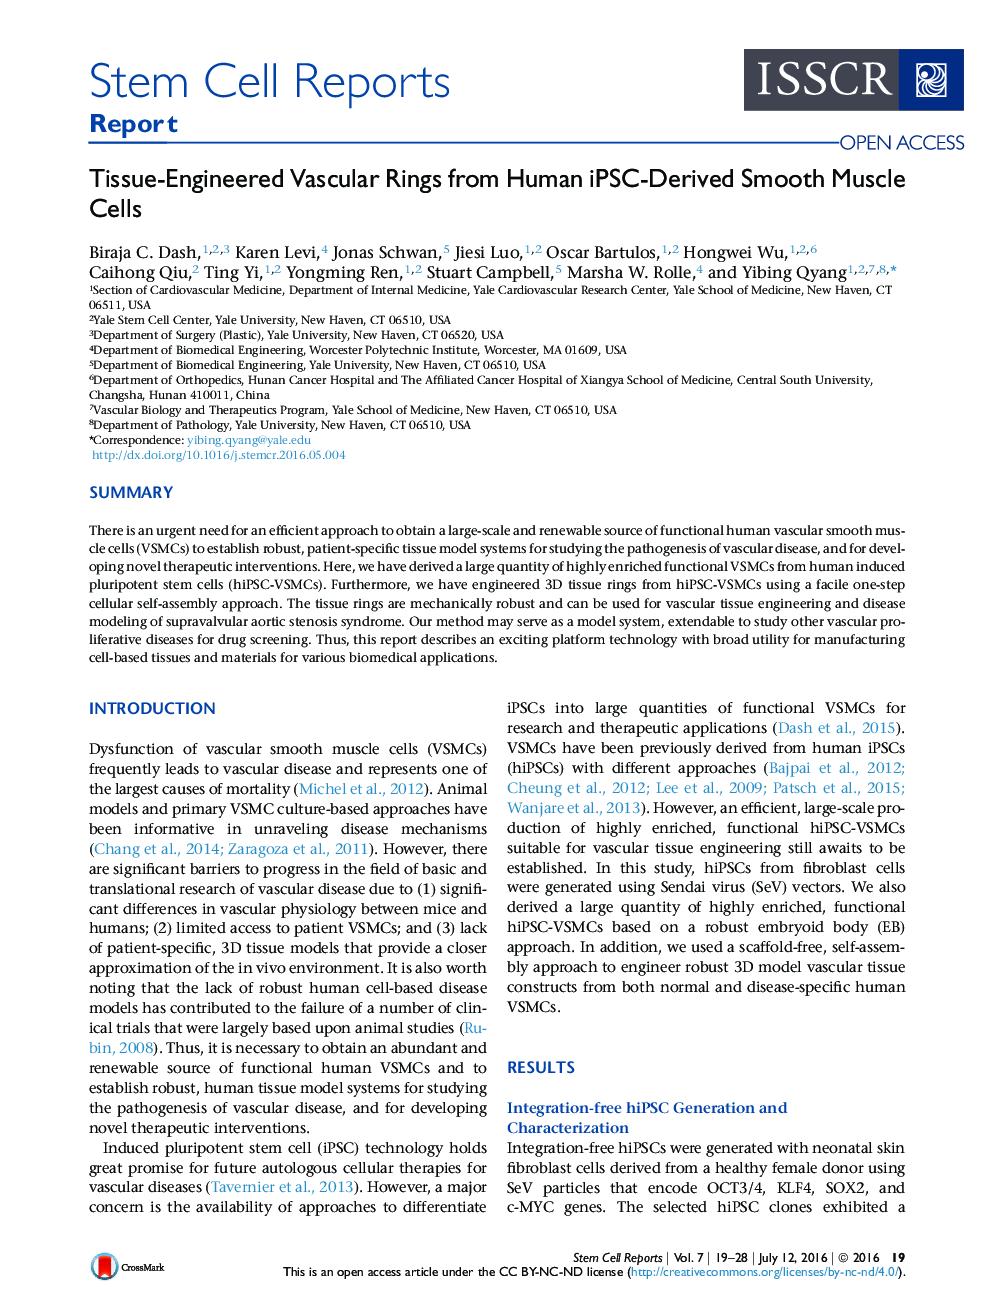 Tissue-Engineered Vascular Rings from Human iPSC-Derived Smooth Muscle Cells